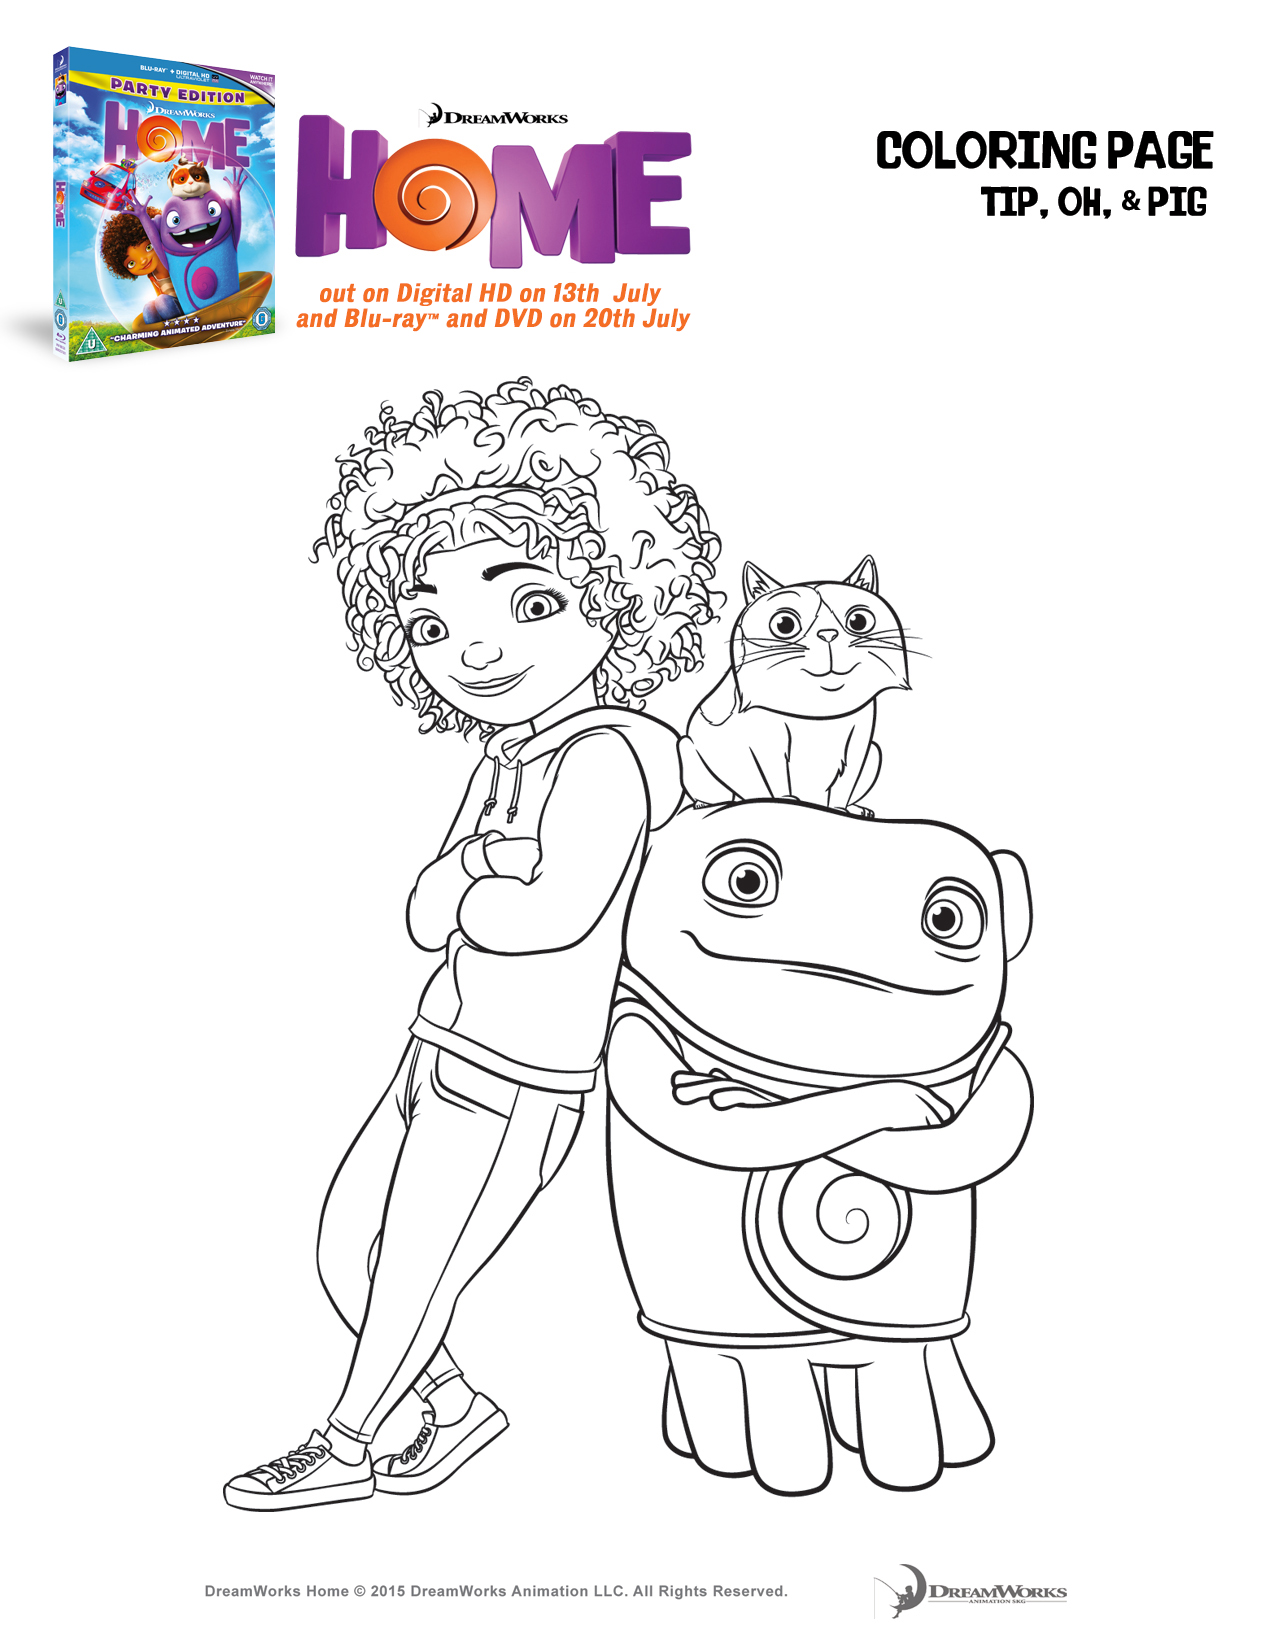 Home printables activity sheets and louring pages